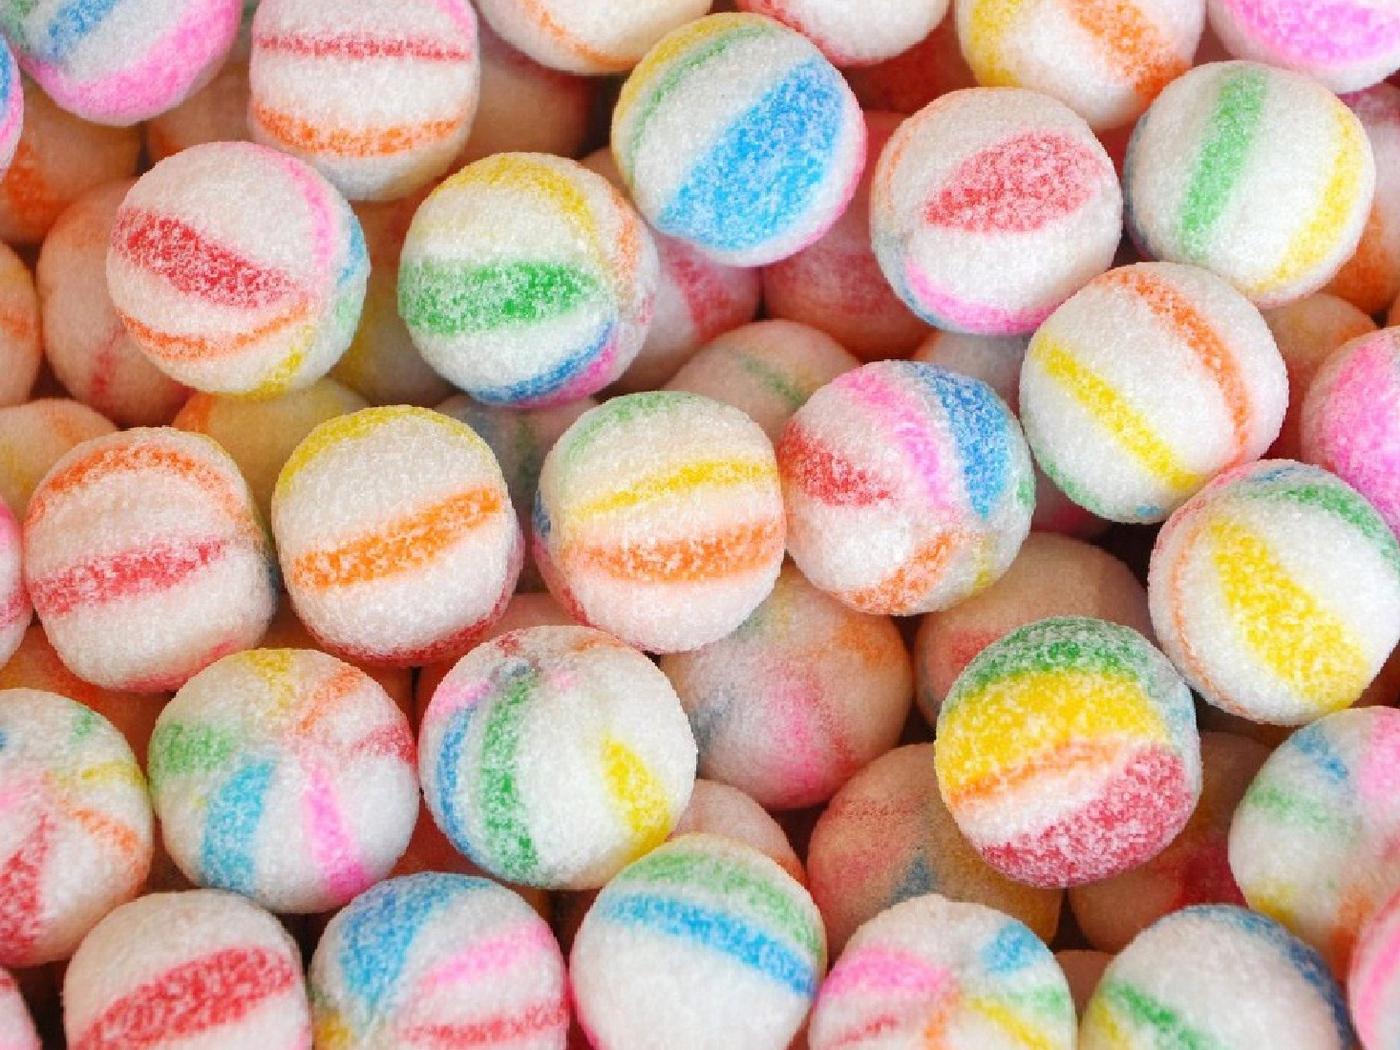 Download wallpaper 1400x1050 candy, striped, delicious